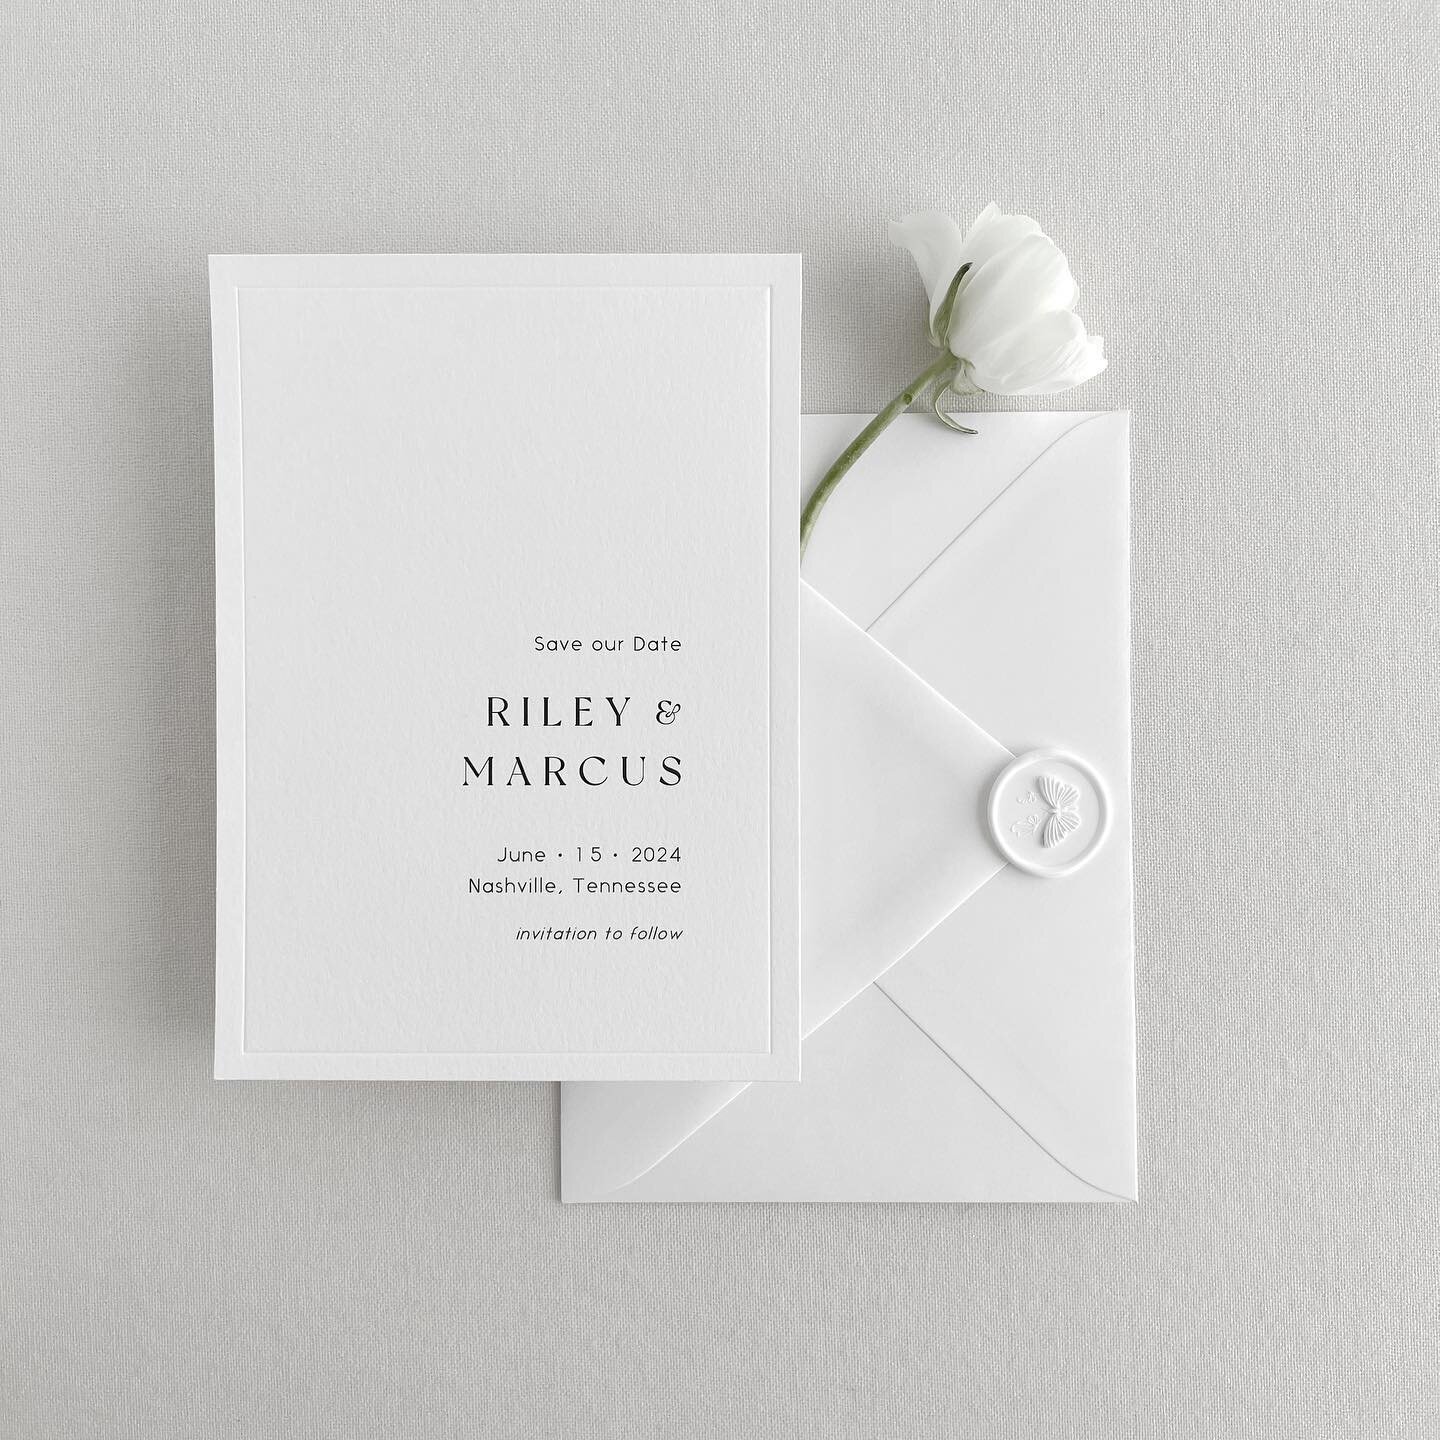 Simplicity with texture - the Nashville Save the Date is our most modern design, perfect for the minimalists at heart 🤍

#savethedate #saveourdate #ido #design #art #weddinginvites #weddinginvitations #weddingstationery #stationery #paper #weddingin